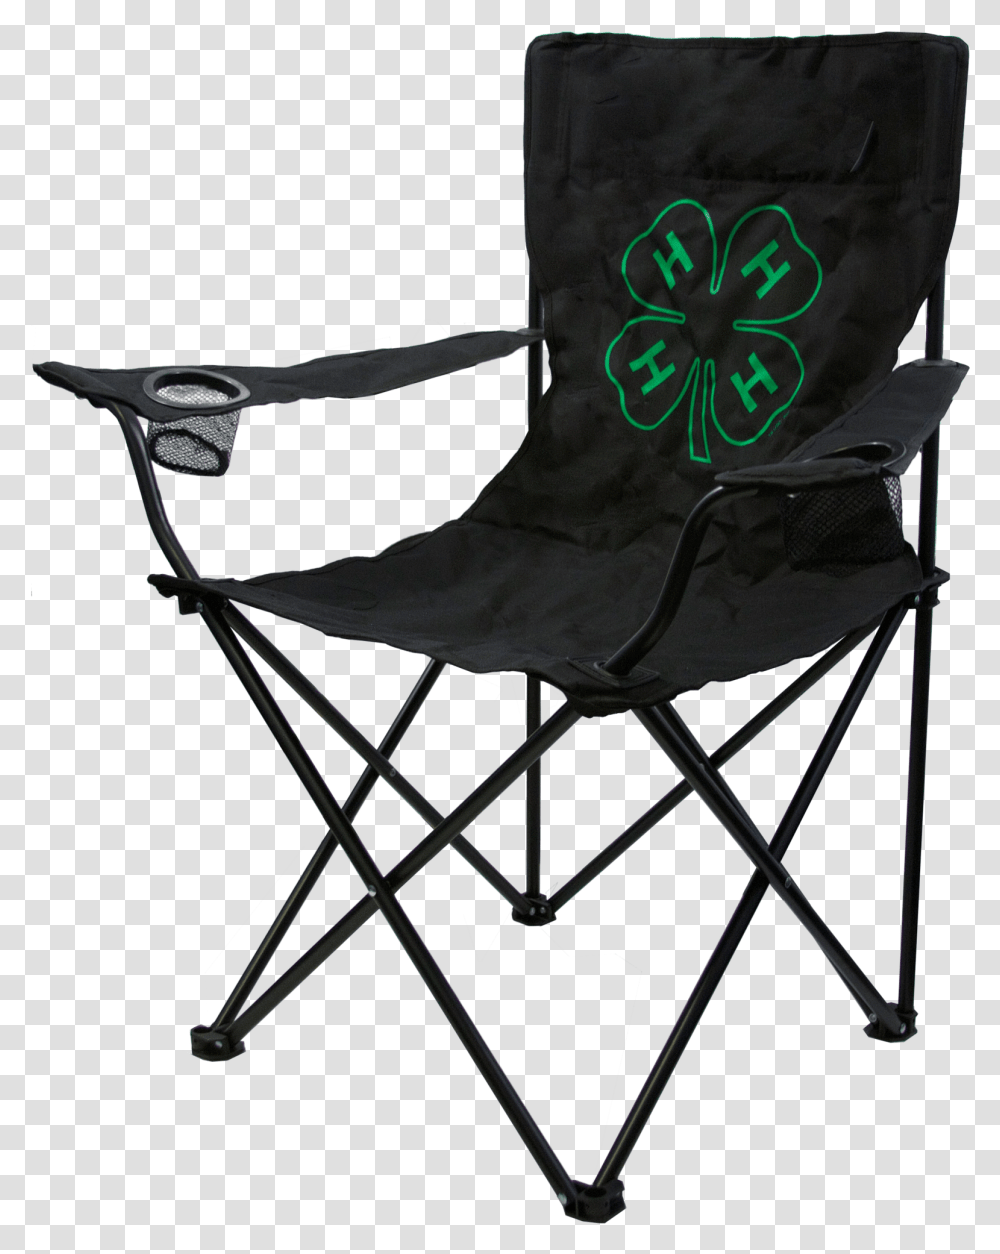 4 H Clover Travel Chair Black Chair Pakistan Price, Furniture, Canvas, Bow, Rocking Chair Transparent Png